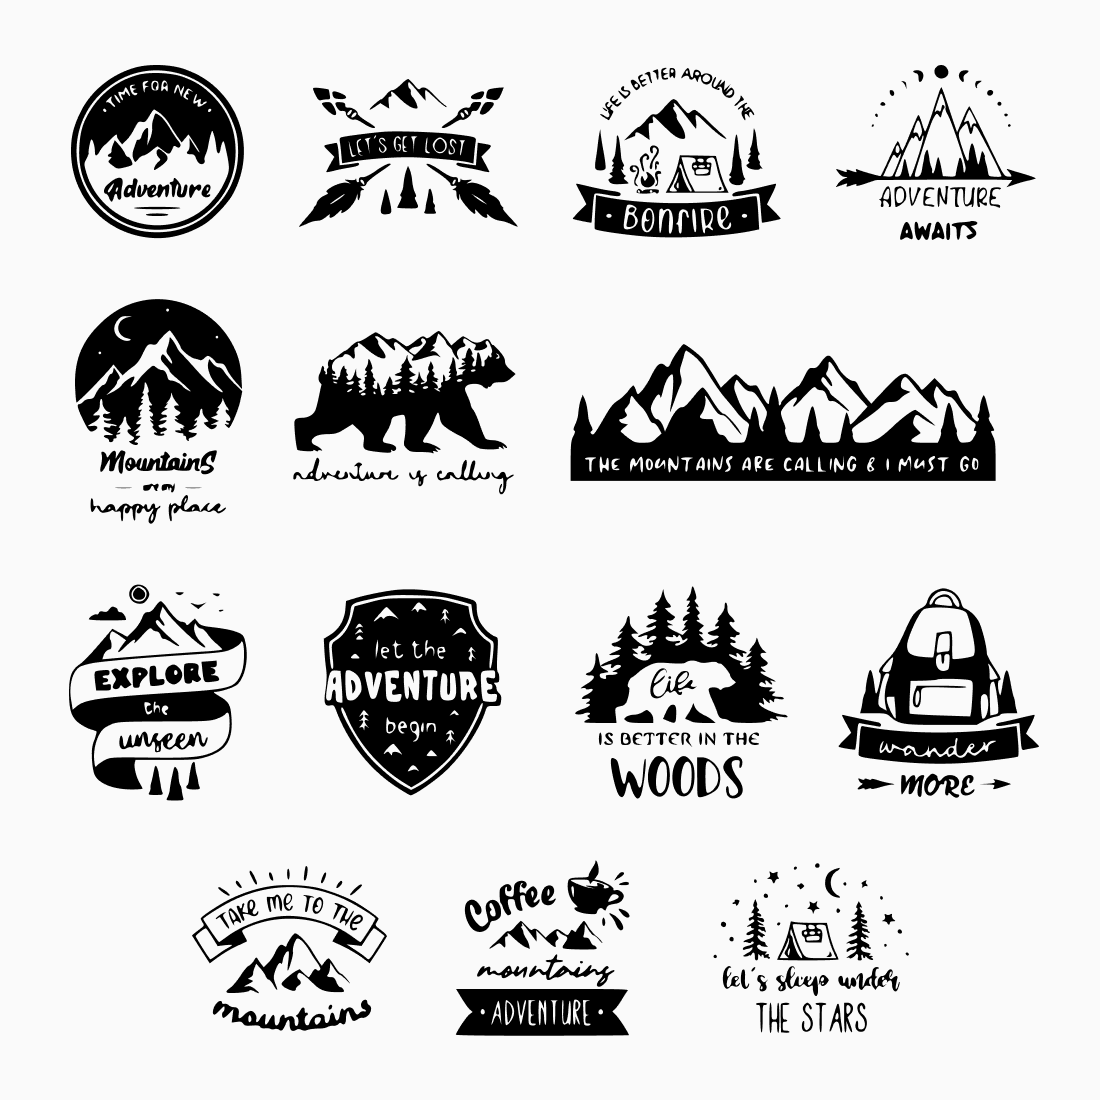 Various logos on the theme of mountains, forests, travel.